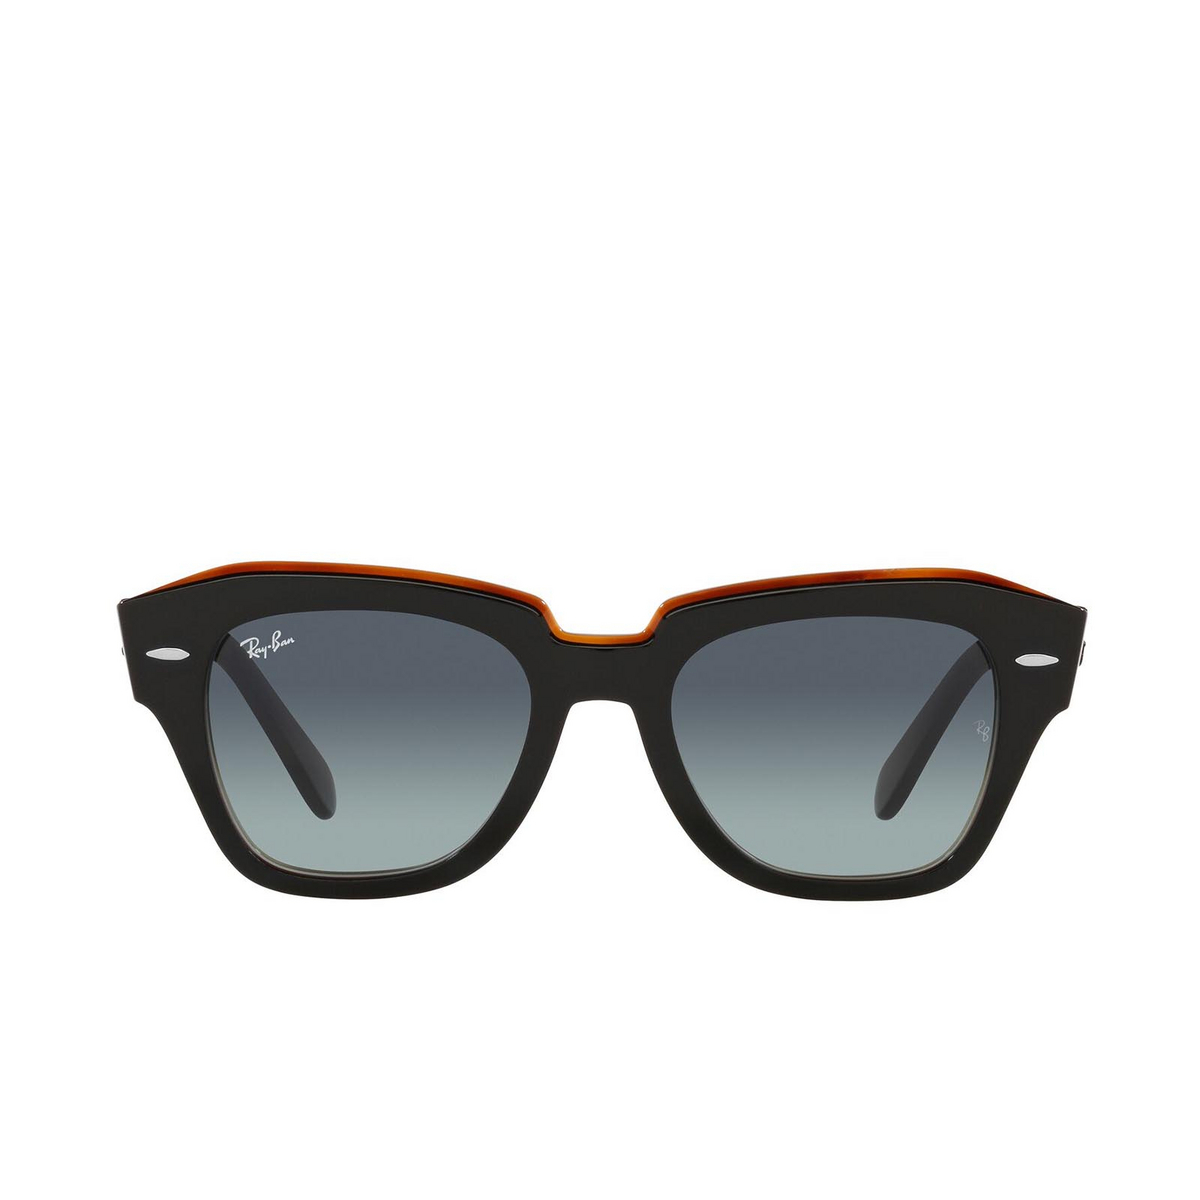 Ray-Ban STATE STREET Sunglasses 132241 Black on Transparent Brown - front view